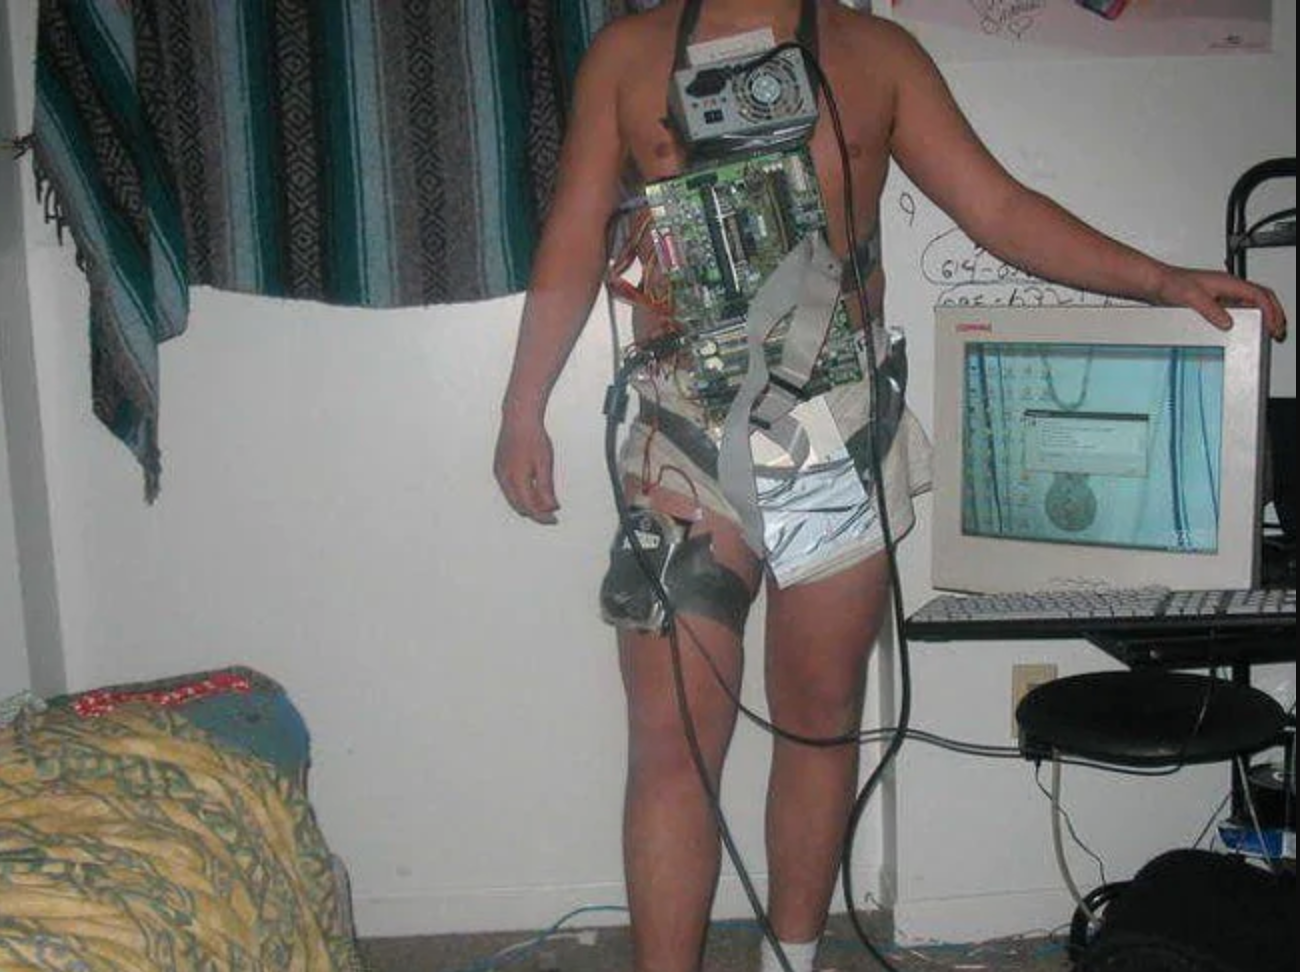 guy who taped a computer to himself for his gaming setup